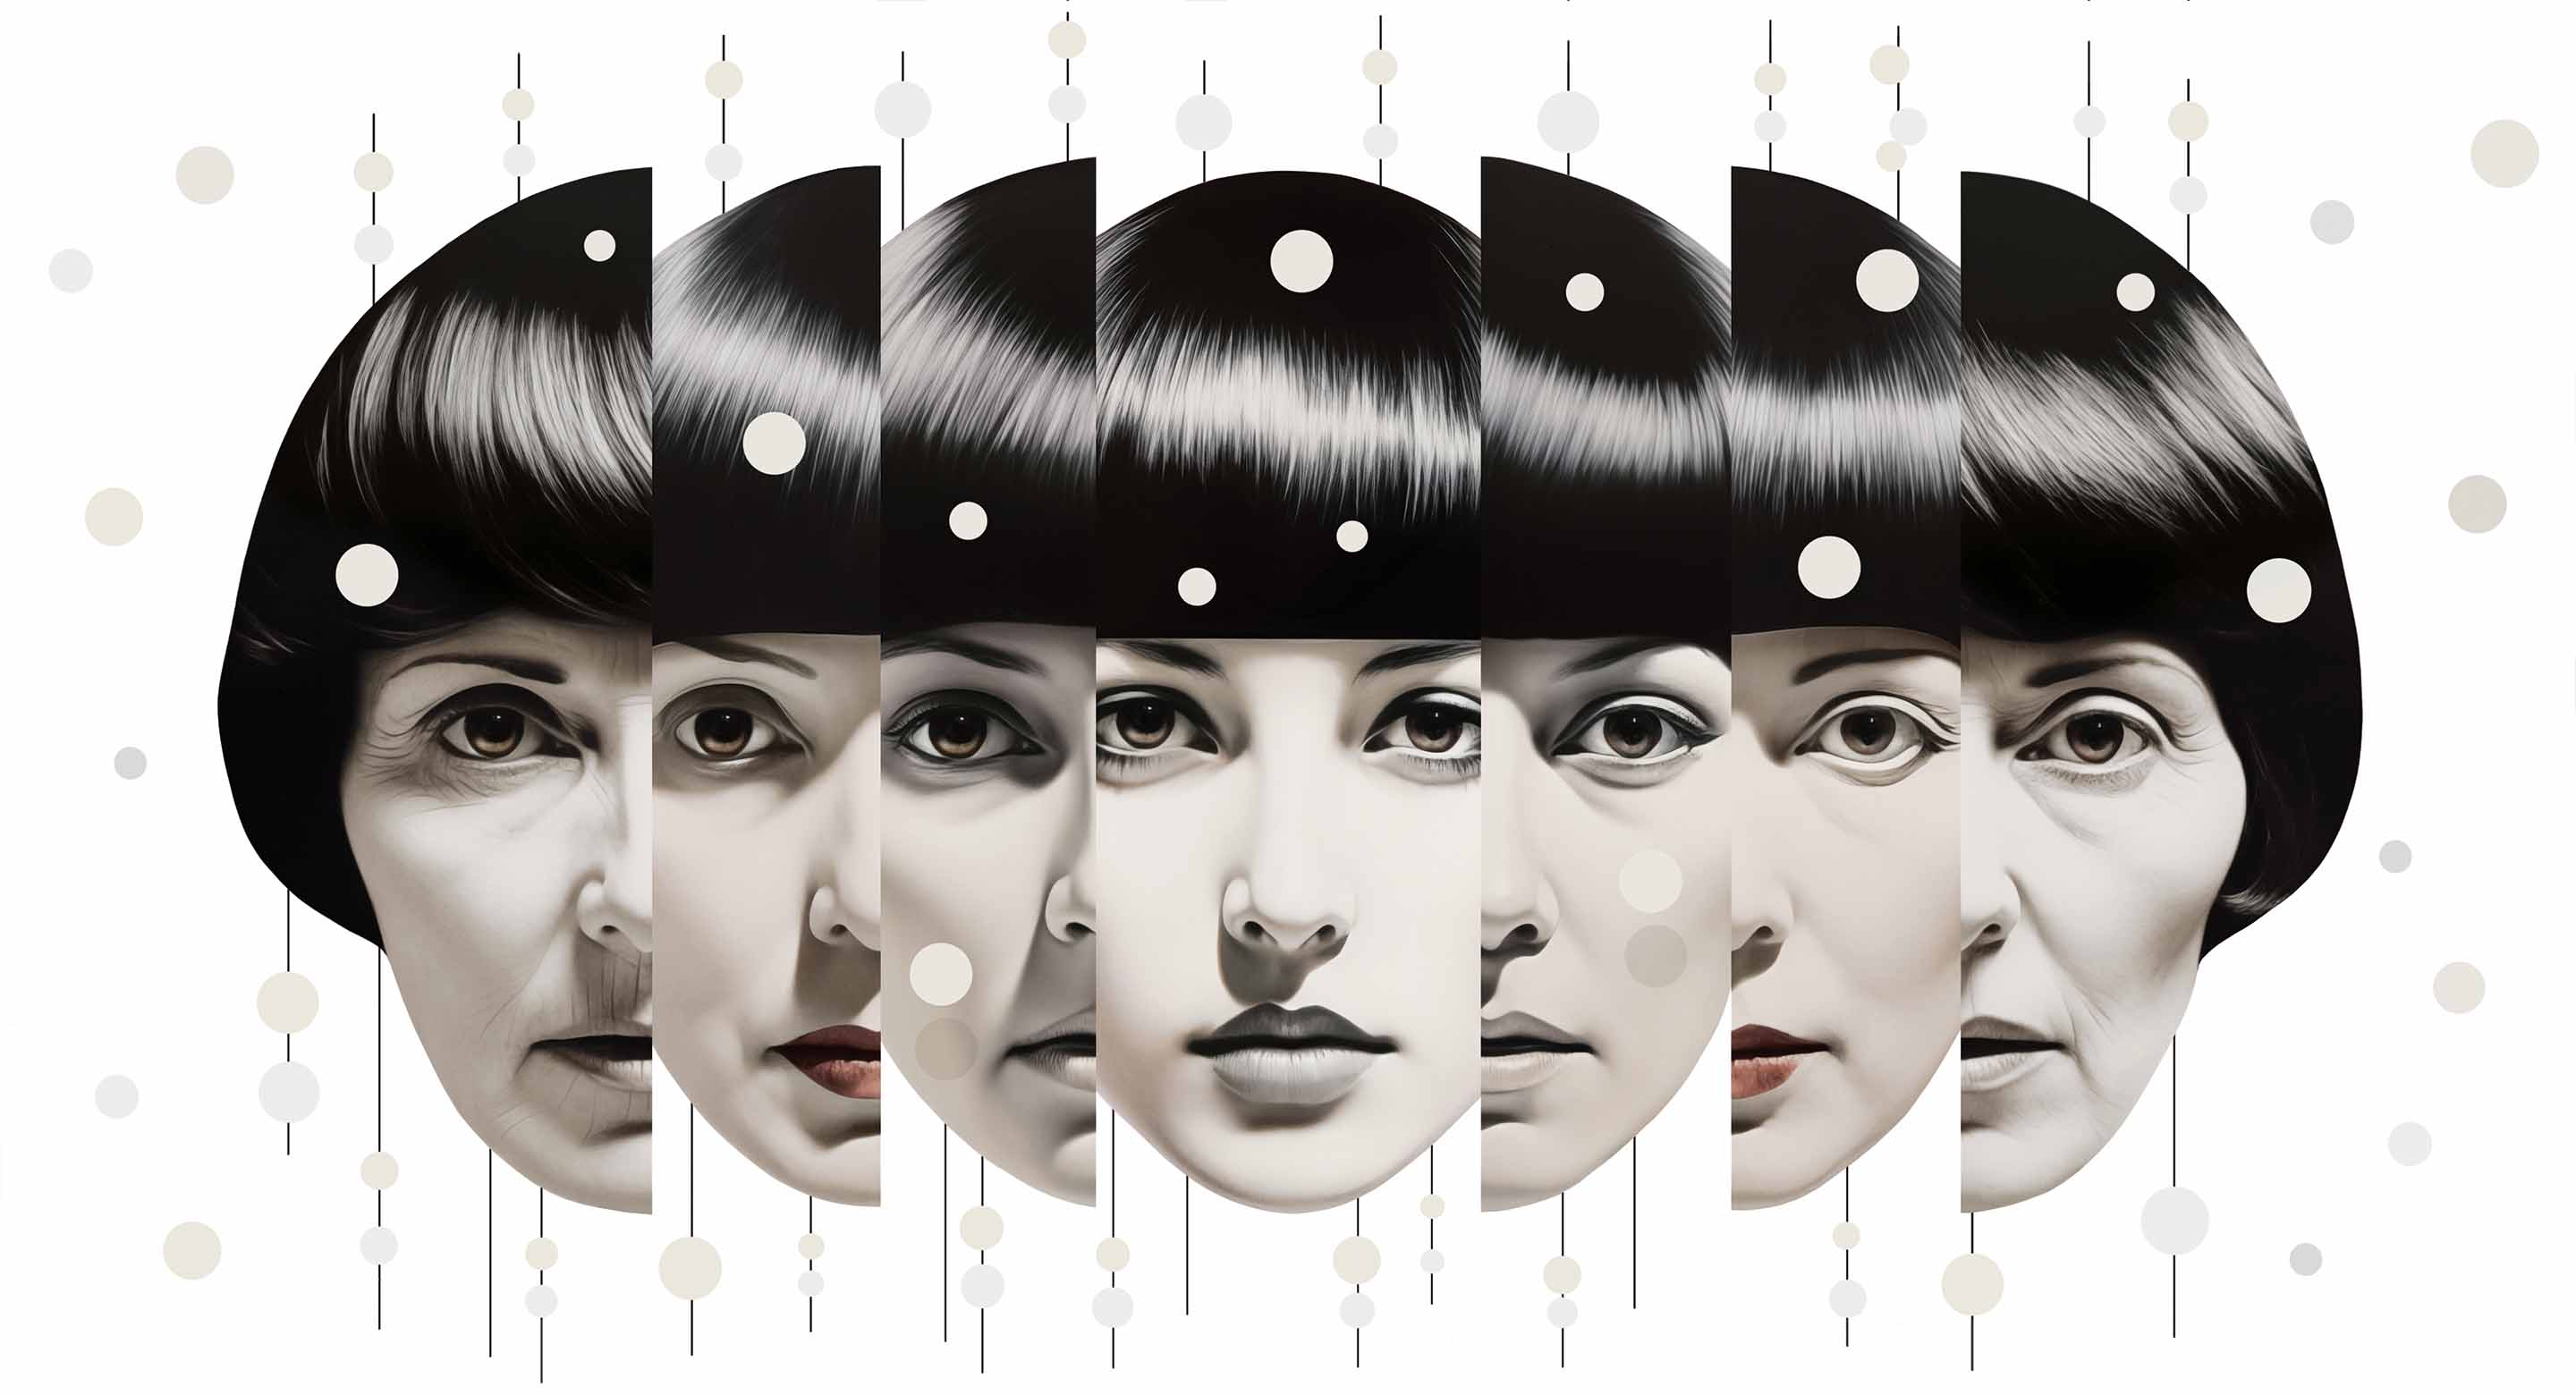 Illustration shows strips of a woman's face. From the middle out, each strip shows that the woman has visibly aged. Lines and circles adorn the illustration.